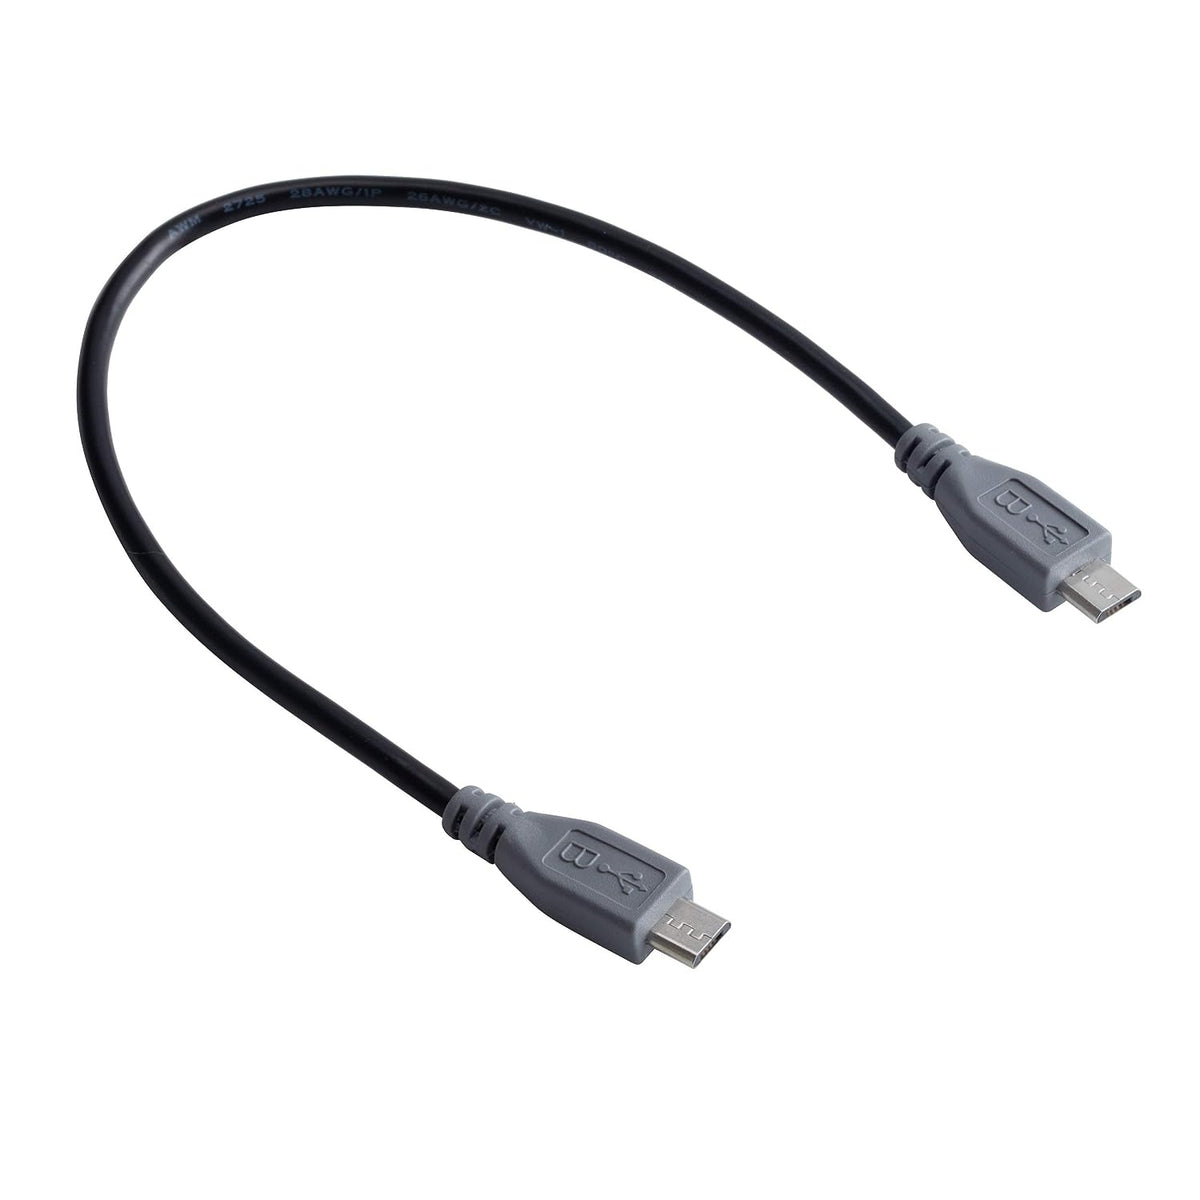 Friendly hobbies Micro USB to Micro USB (Male to Male) OTG Data Cable (3 ft)